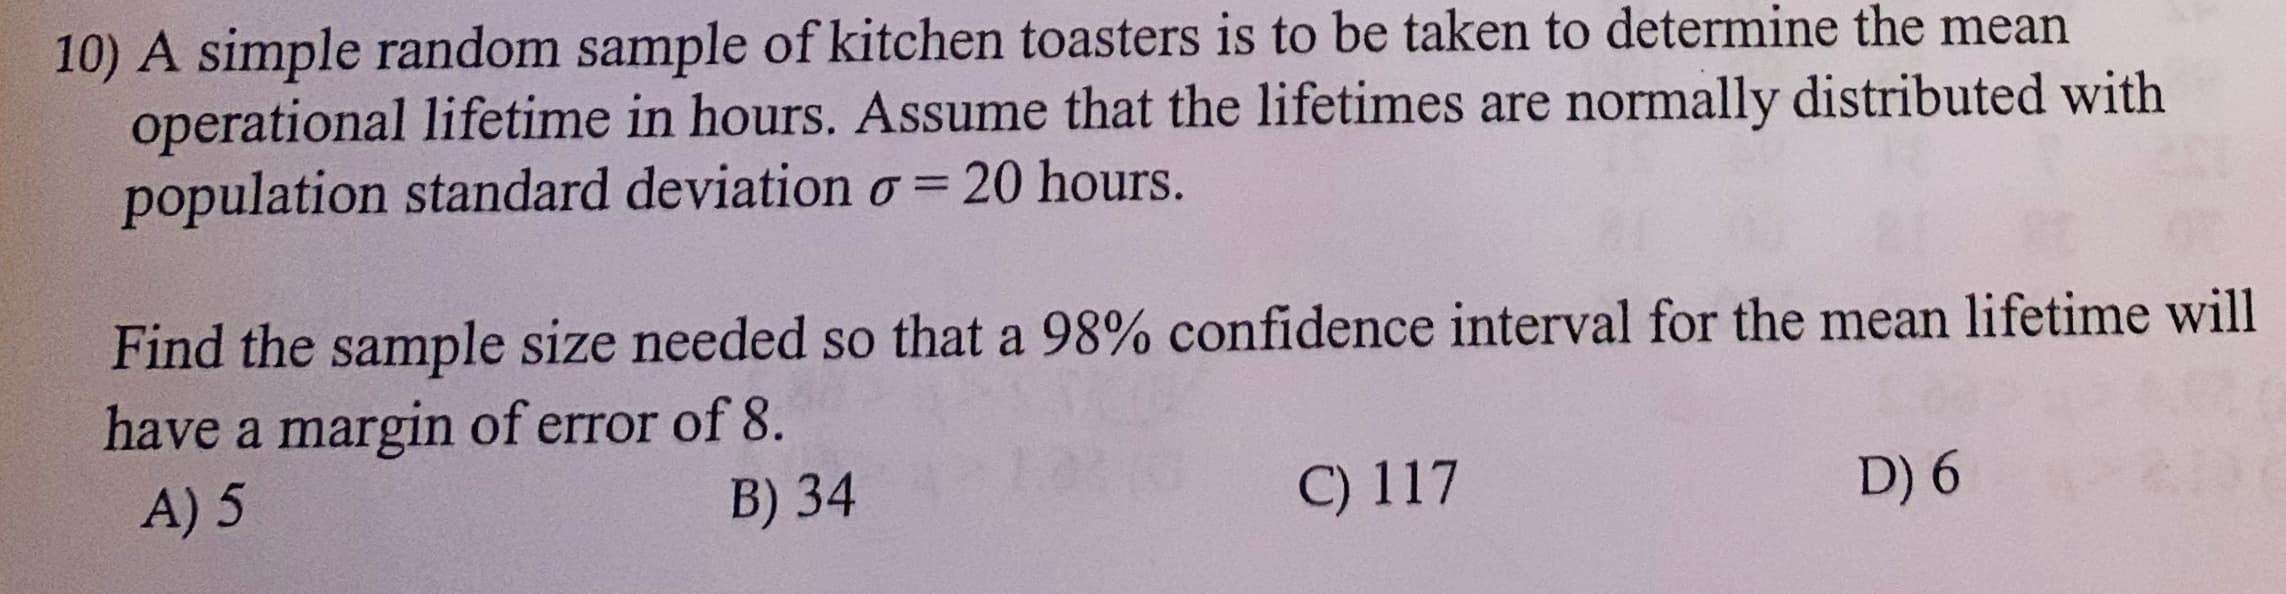 10) A simple random sample of kitchen toasters is to be taken to determine the mean
operational lifetime in hours. Assume that the lifetimes are normally distributed with
population standard deviation o= 20 hours.
Find the sample size needed so that a 98% confidence interval for the mean lifetime will
have a margin of error of 8.
A) 5
B) 34
C) 117
D) 6
